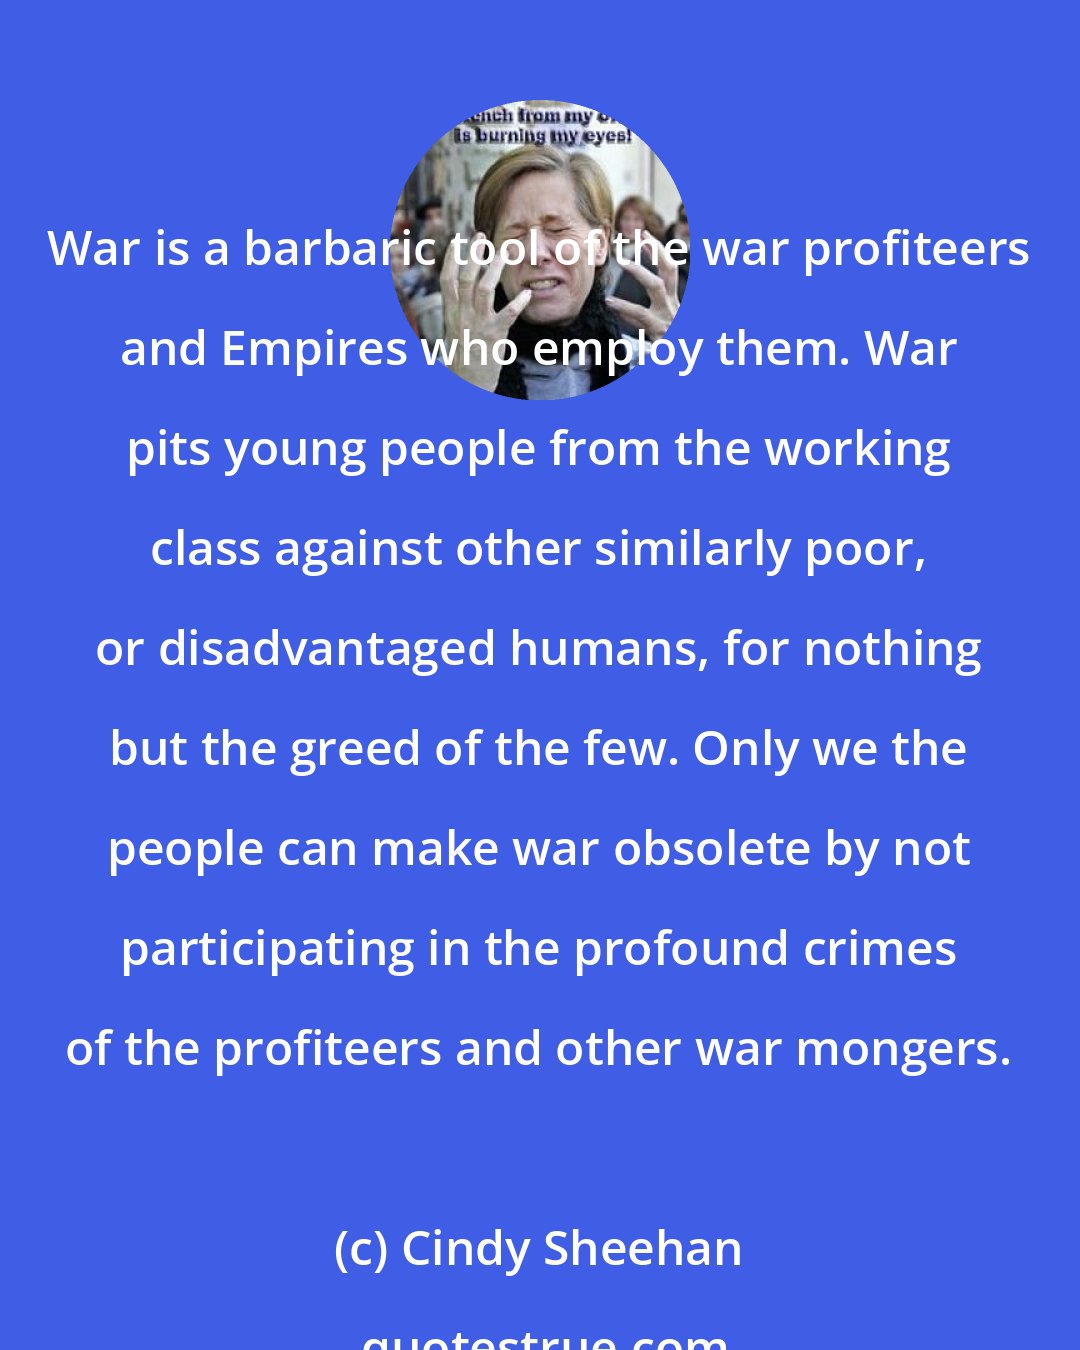 Cindy Sheehan: War is a barbaric tool of the war profiteers and Empires who employ them. War pits young people from the working class against other similarly poor, or disadvantaged humans, for nothing but the greed of the few. Only we the people can make war obsolete by not participating in the profound crimes of the profiteers and other war mongers.